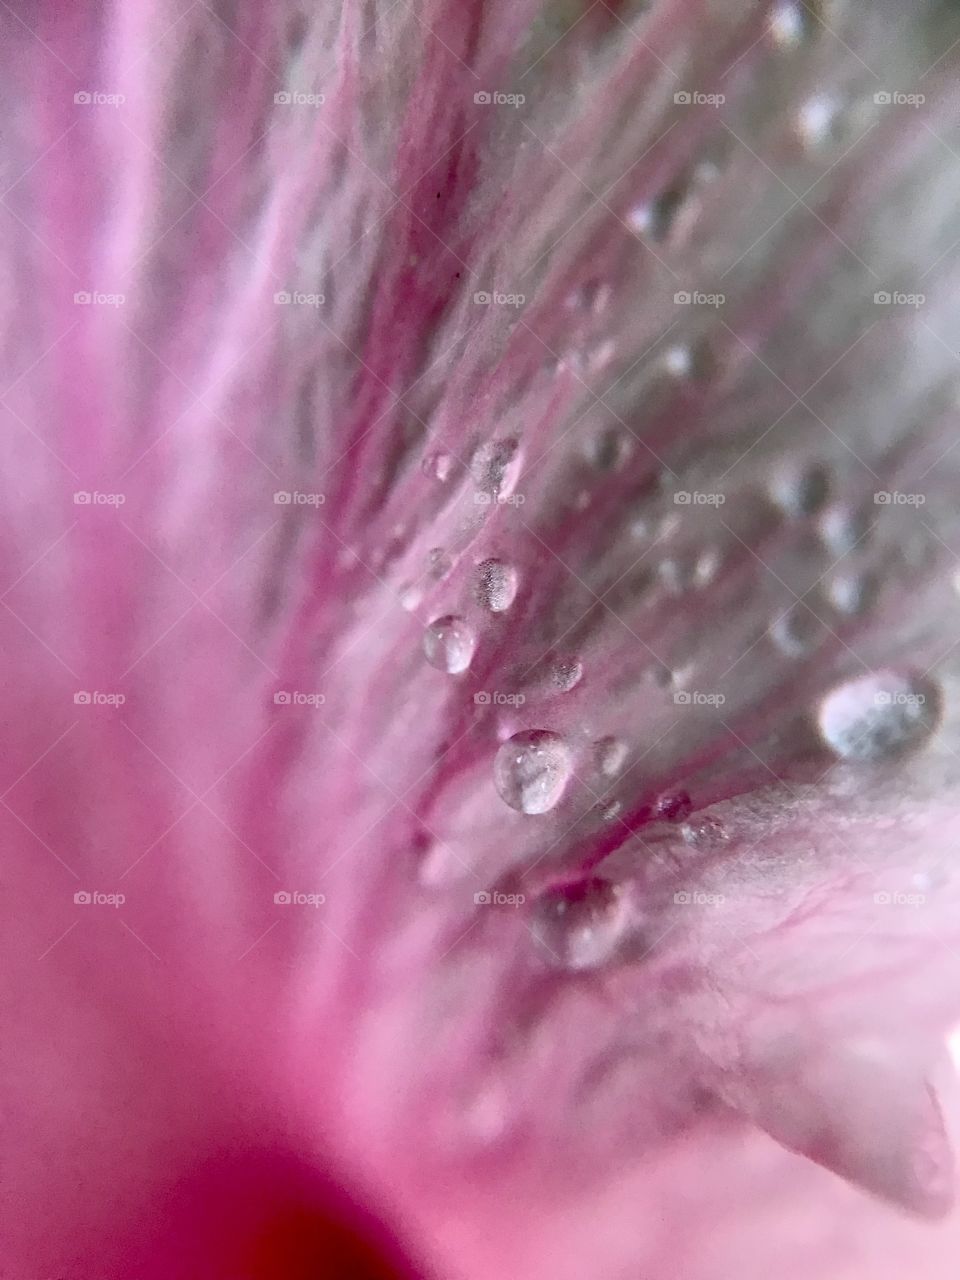 Water droplets on a pink pedal